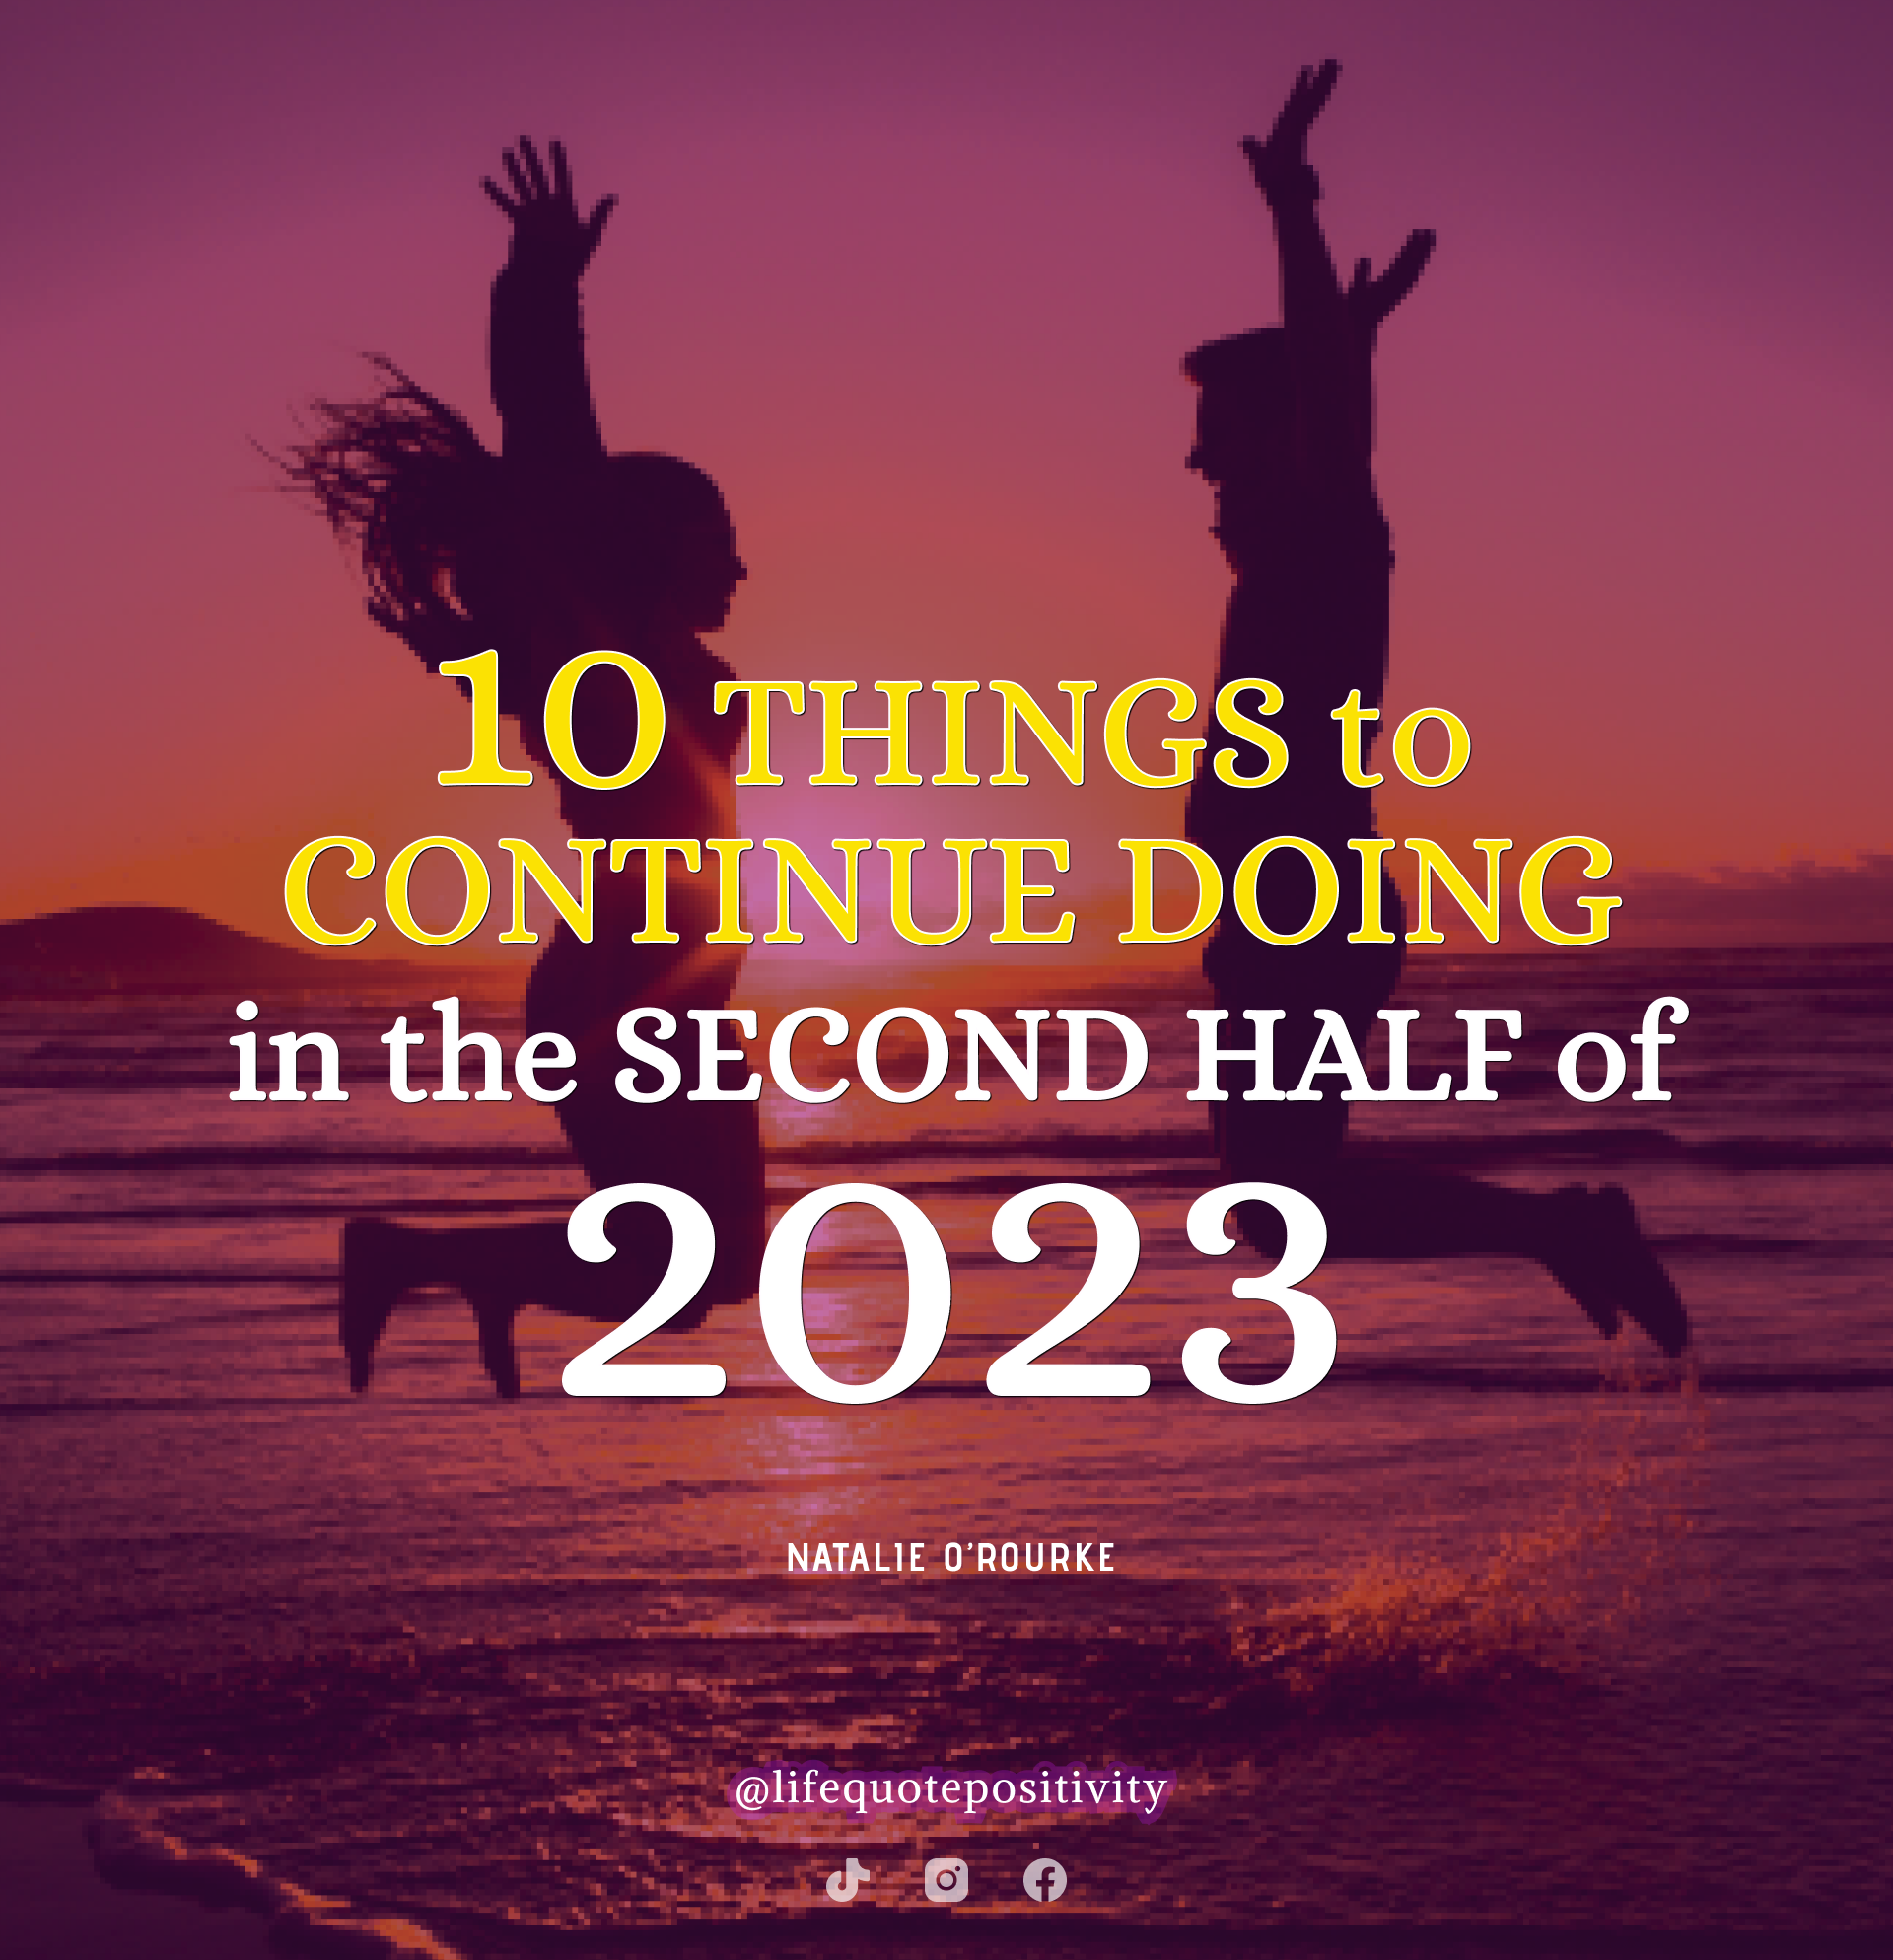 10 THINGS TO CONTINUE DOING IN THE SECOND HALF OF 2023